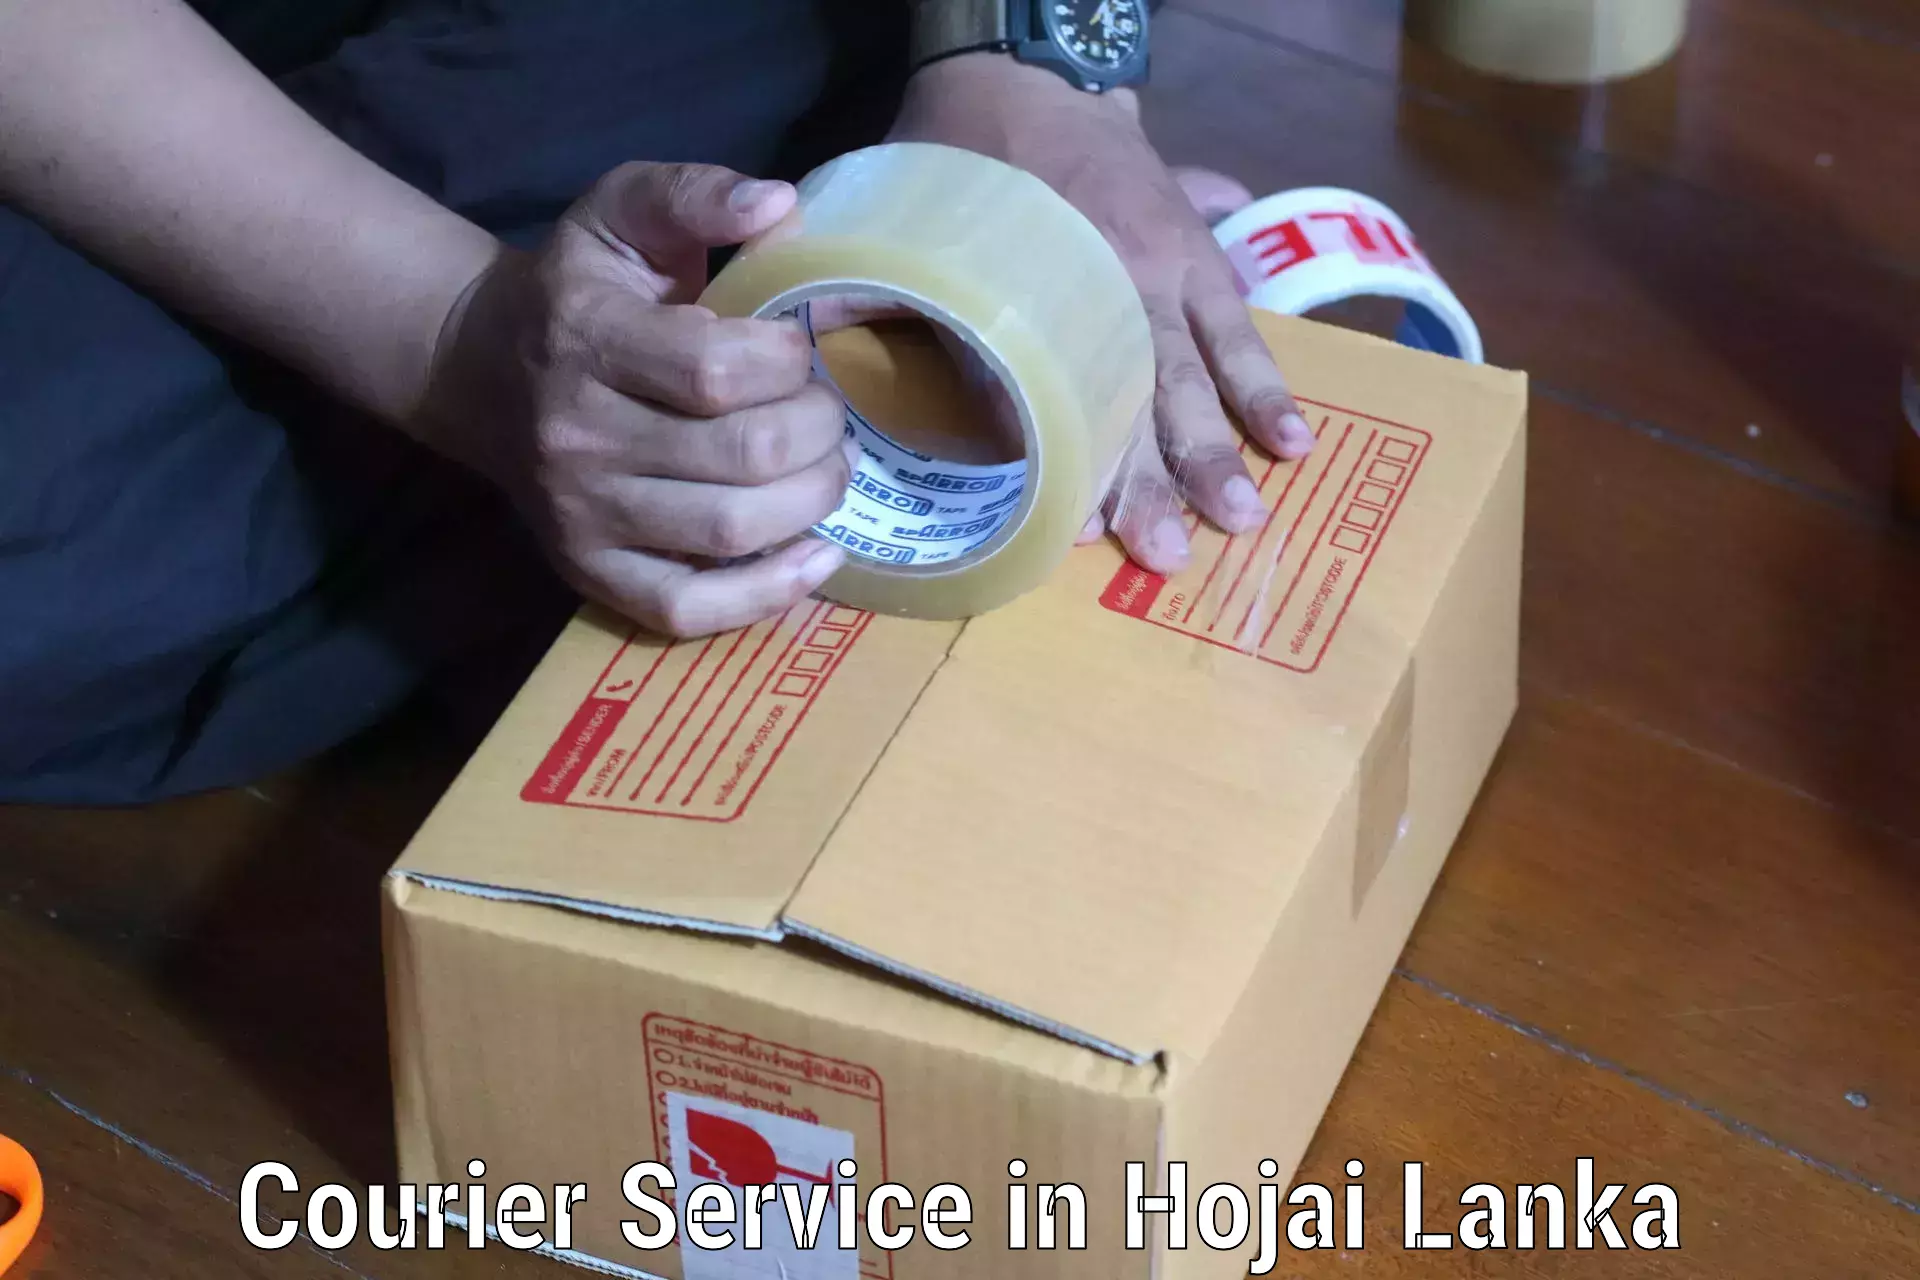 High-quality delivery services in Hojai Lanka